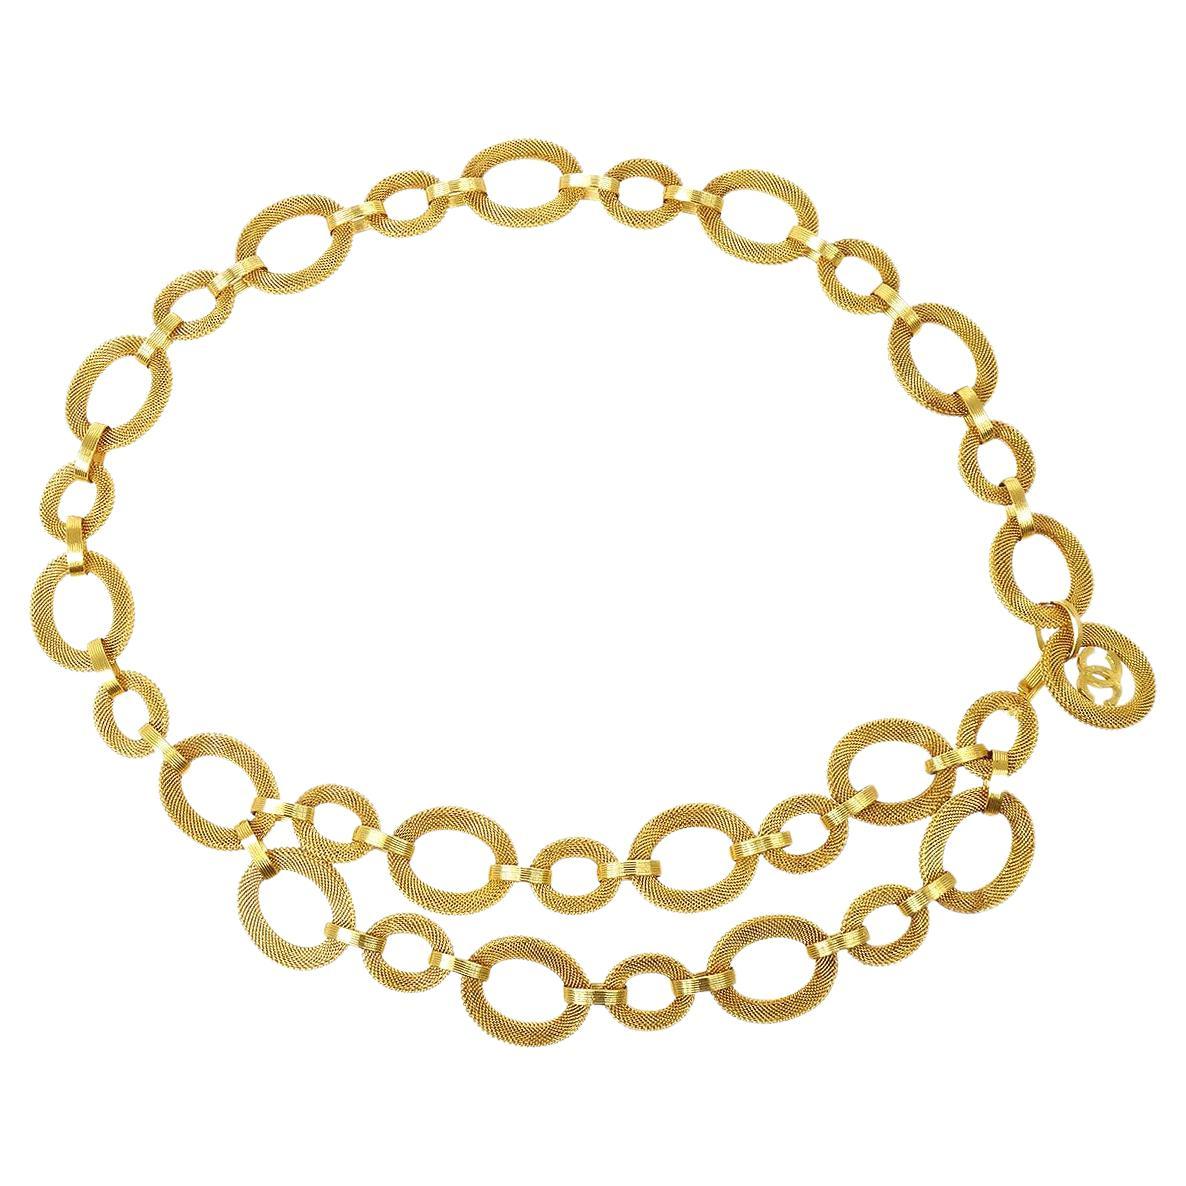 CHANEL CC Gold Metal Textured Charm Chain Link Waist Belt For Sale